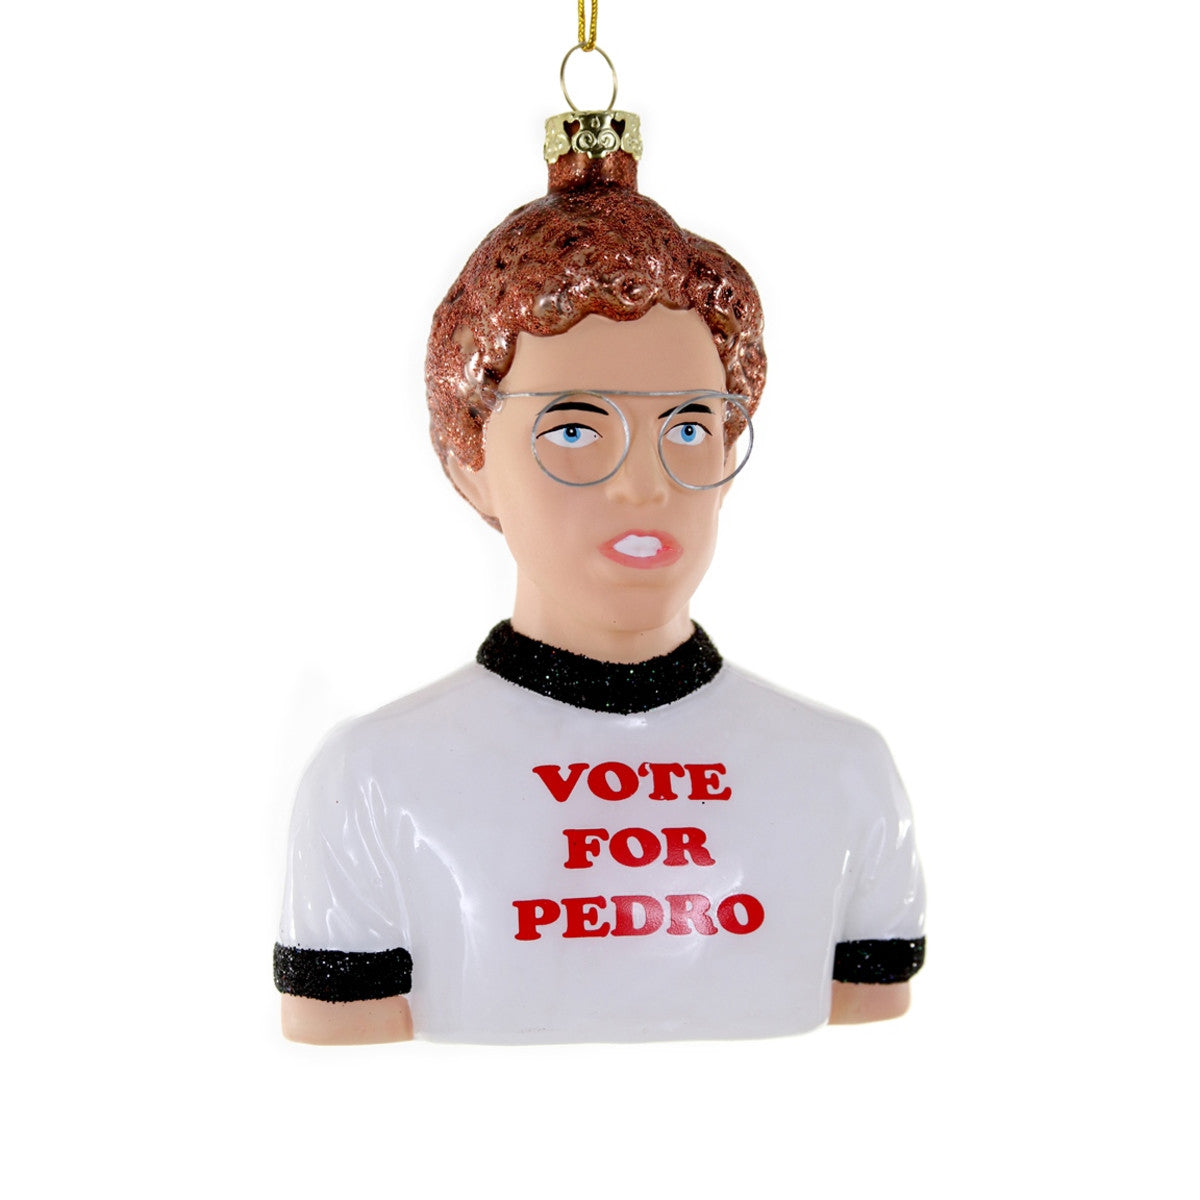 Cody Foster & Co Napoleon Dynamite Bauble 